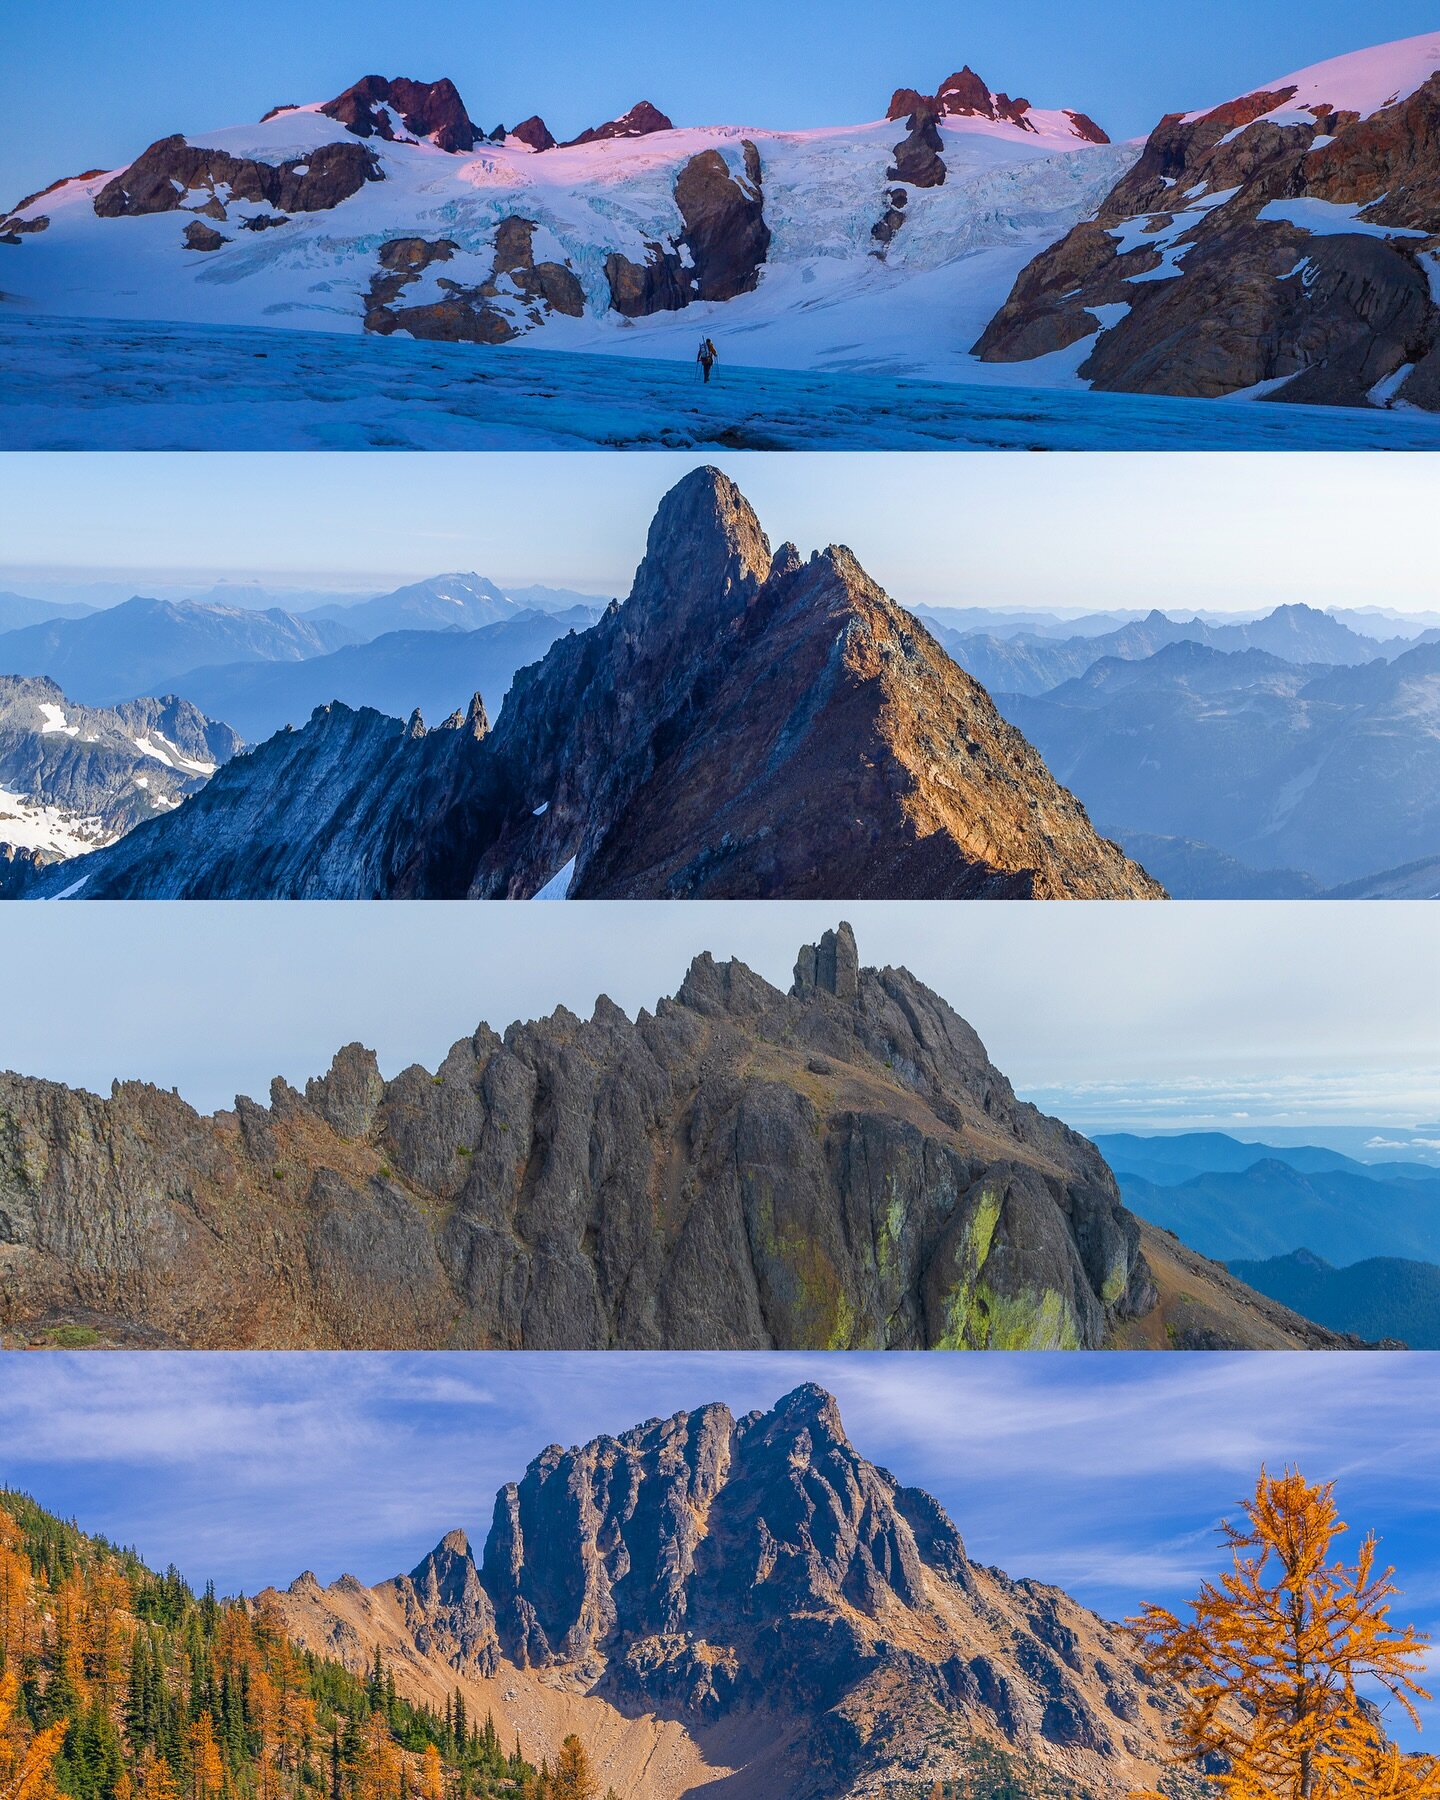 New Post! Link in Bio: I ranked all of my climbs from 2023, these four summits scored a 10/10. Extra credit: Can you name any of them before reading the blog? #lifeisbetteroutside #highlife #mountainclimbing #pnwwonderland #northcascades #olympicmoun